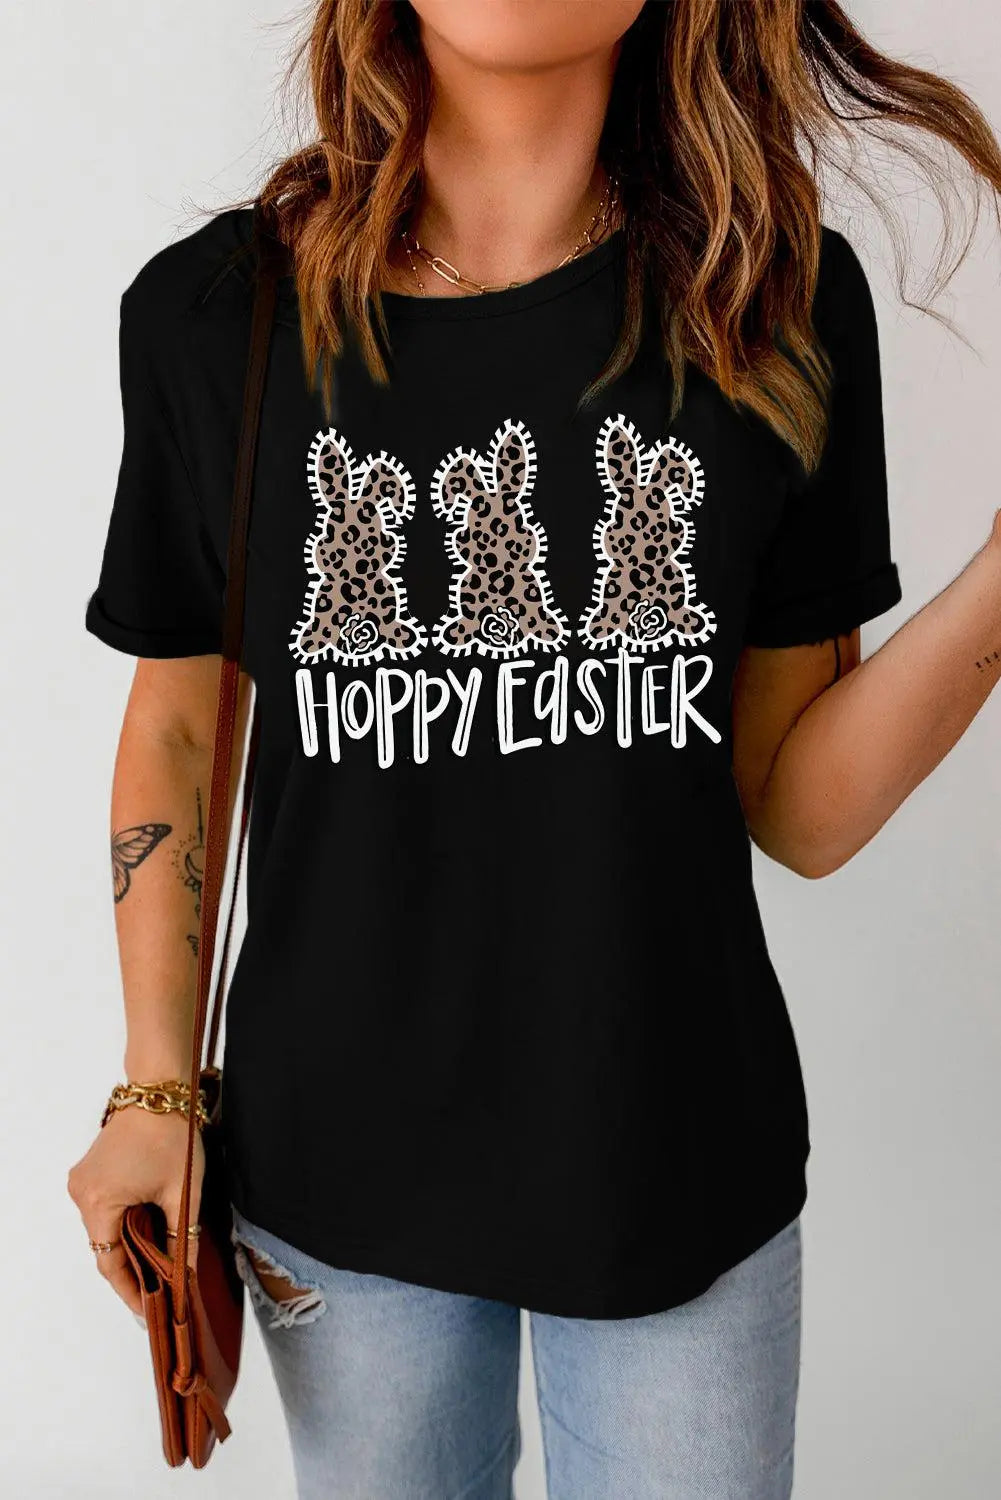 HOPPY EASTER Graphic Tee Shirt BLUE ZONE PLANET